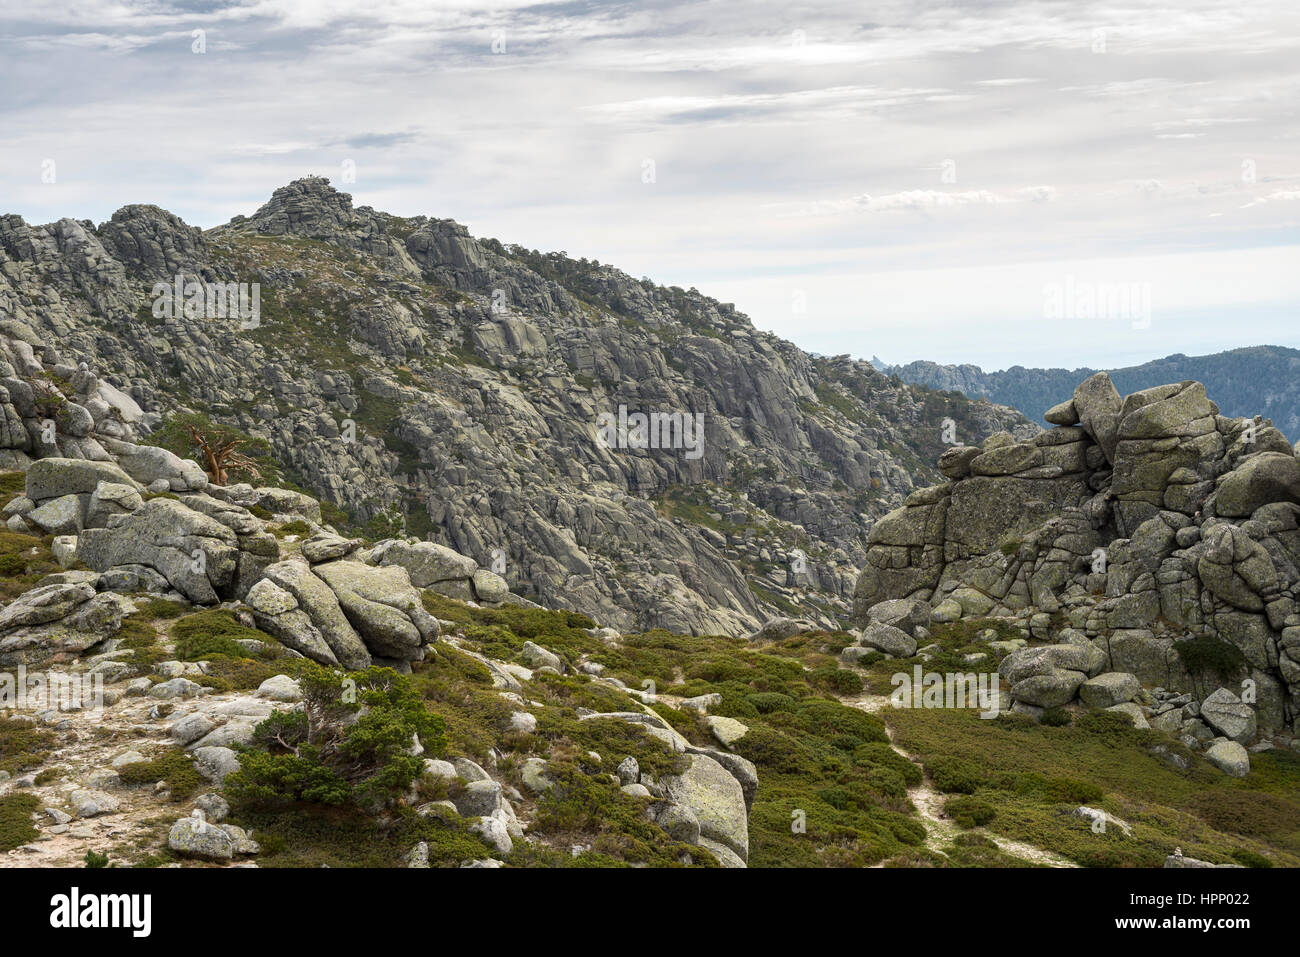 Views of Siete Picos (Seven Peaks) range. It is one of the mountain ranges better known in Guadarrama Mountains National Park, province of Madrid, Spa Stock Photo